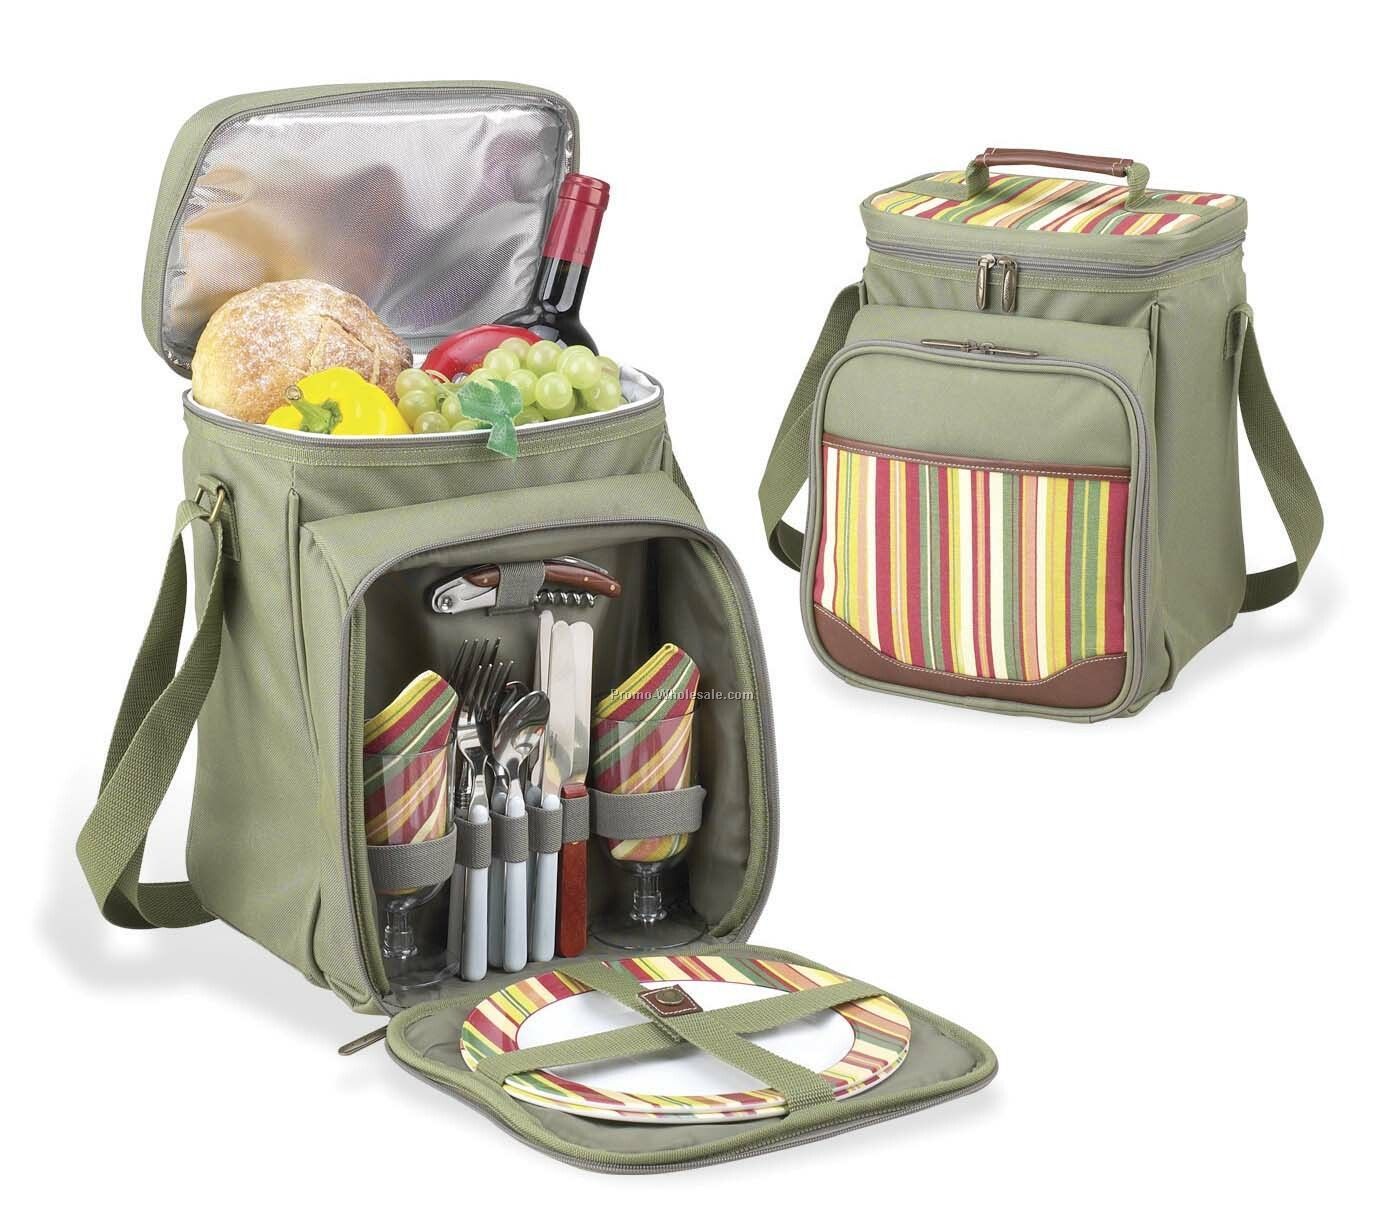 13.5"x9.7" X9.5" Picnic Cooler For Two